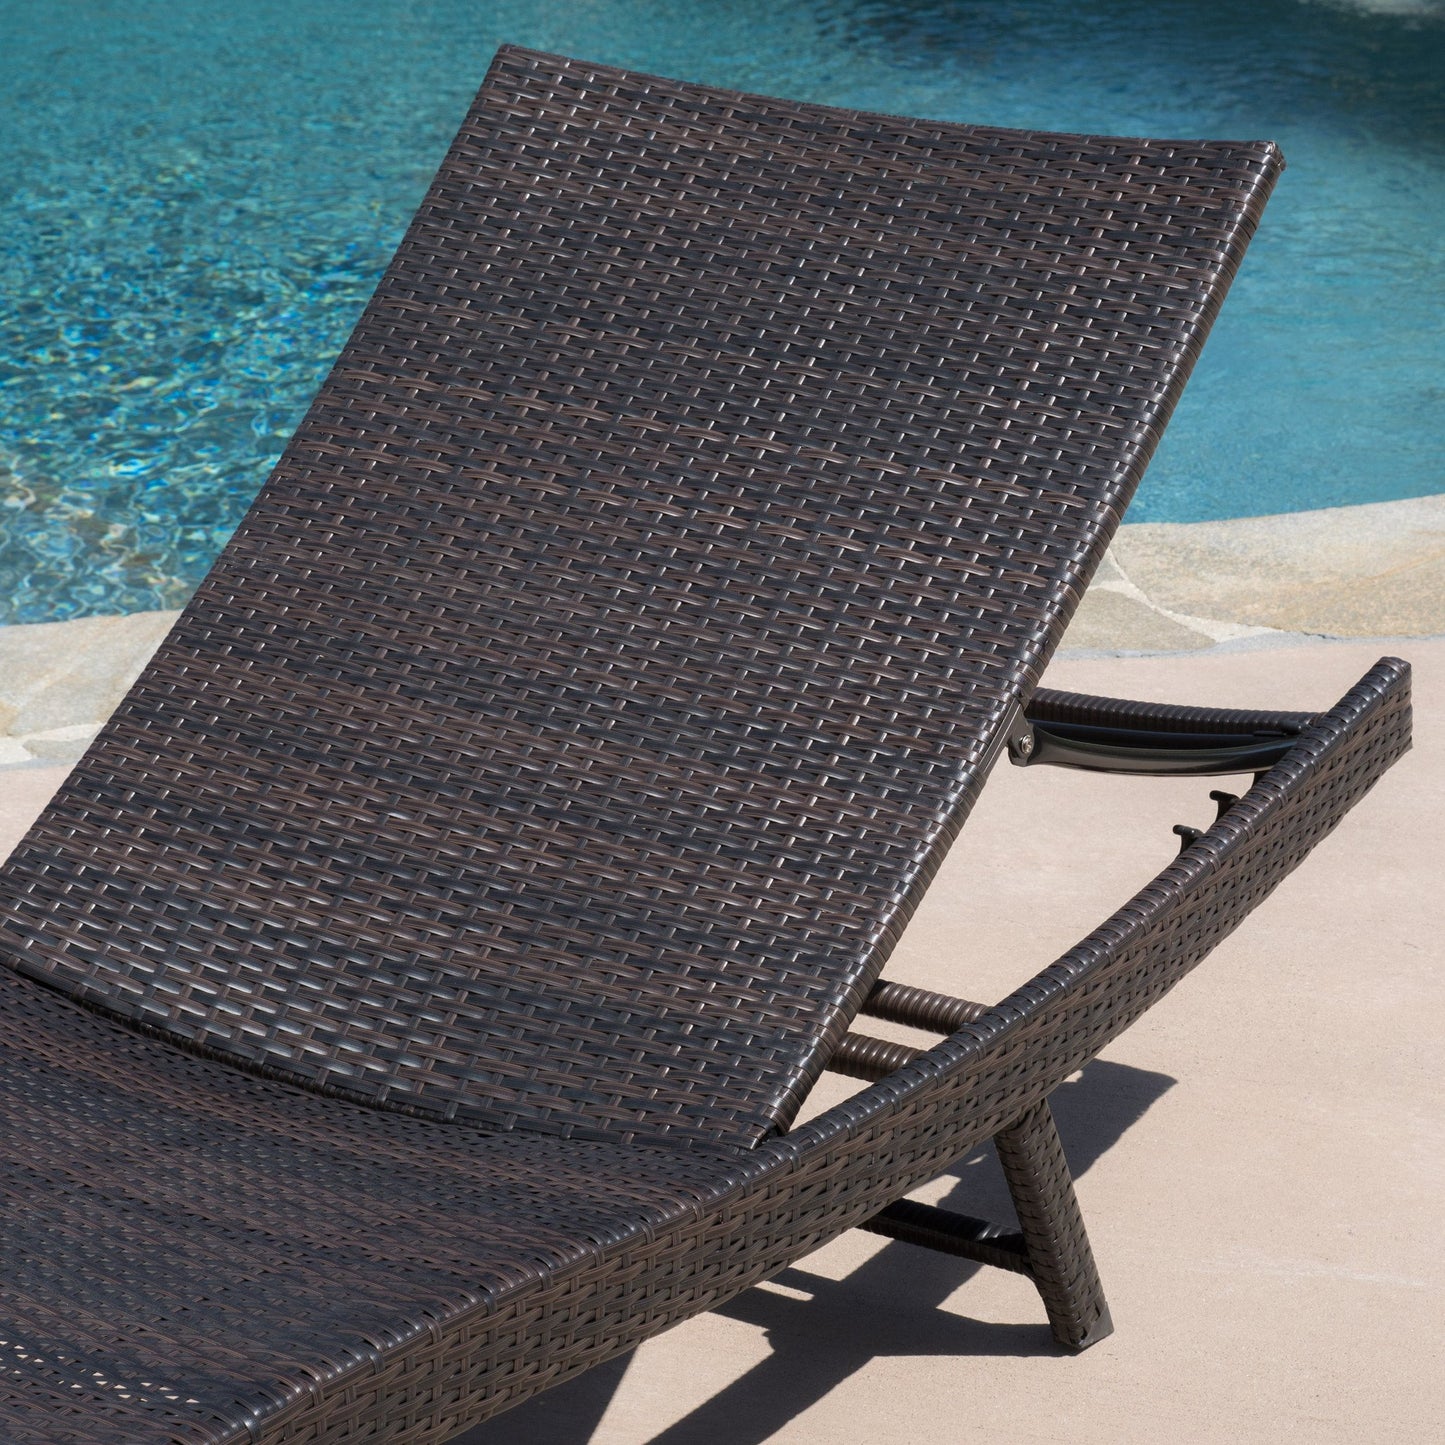 Eliana Outdoor 6pc Brown Wicker Chaise Lounge Chairs Set